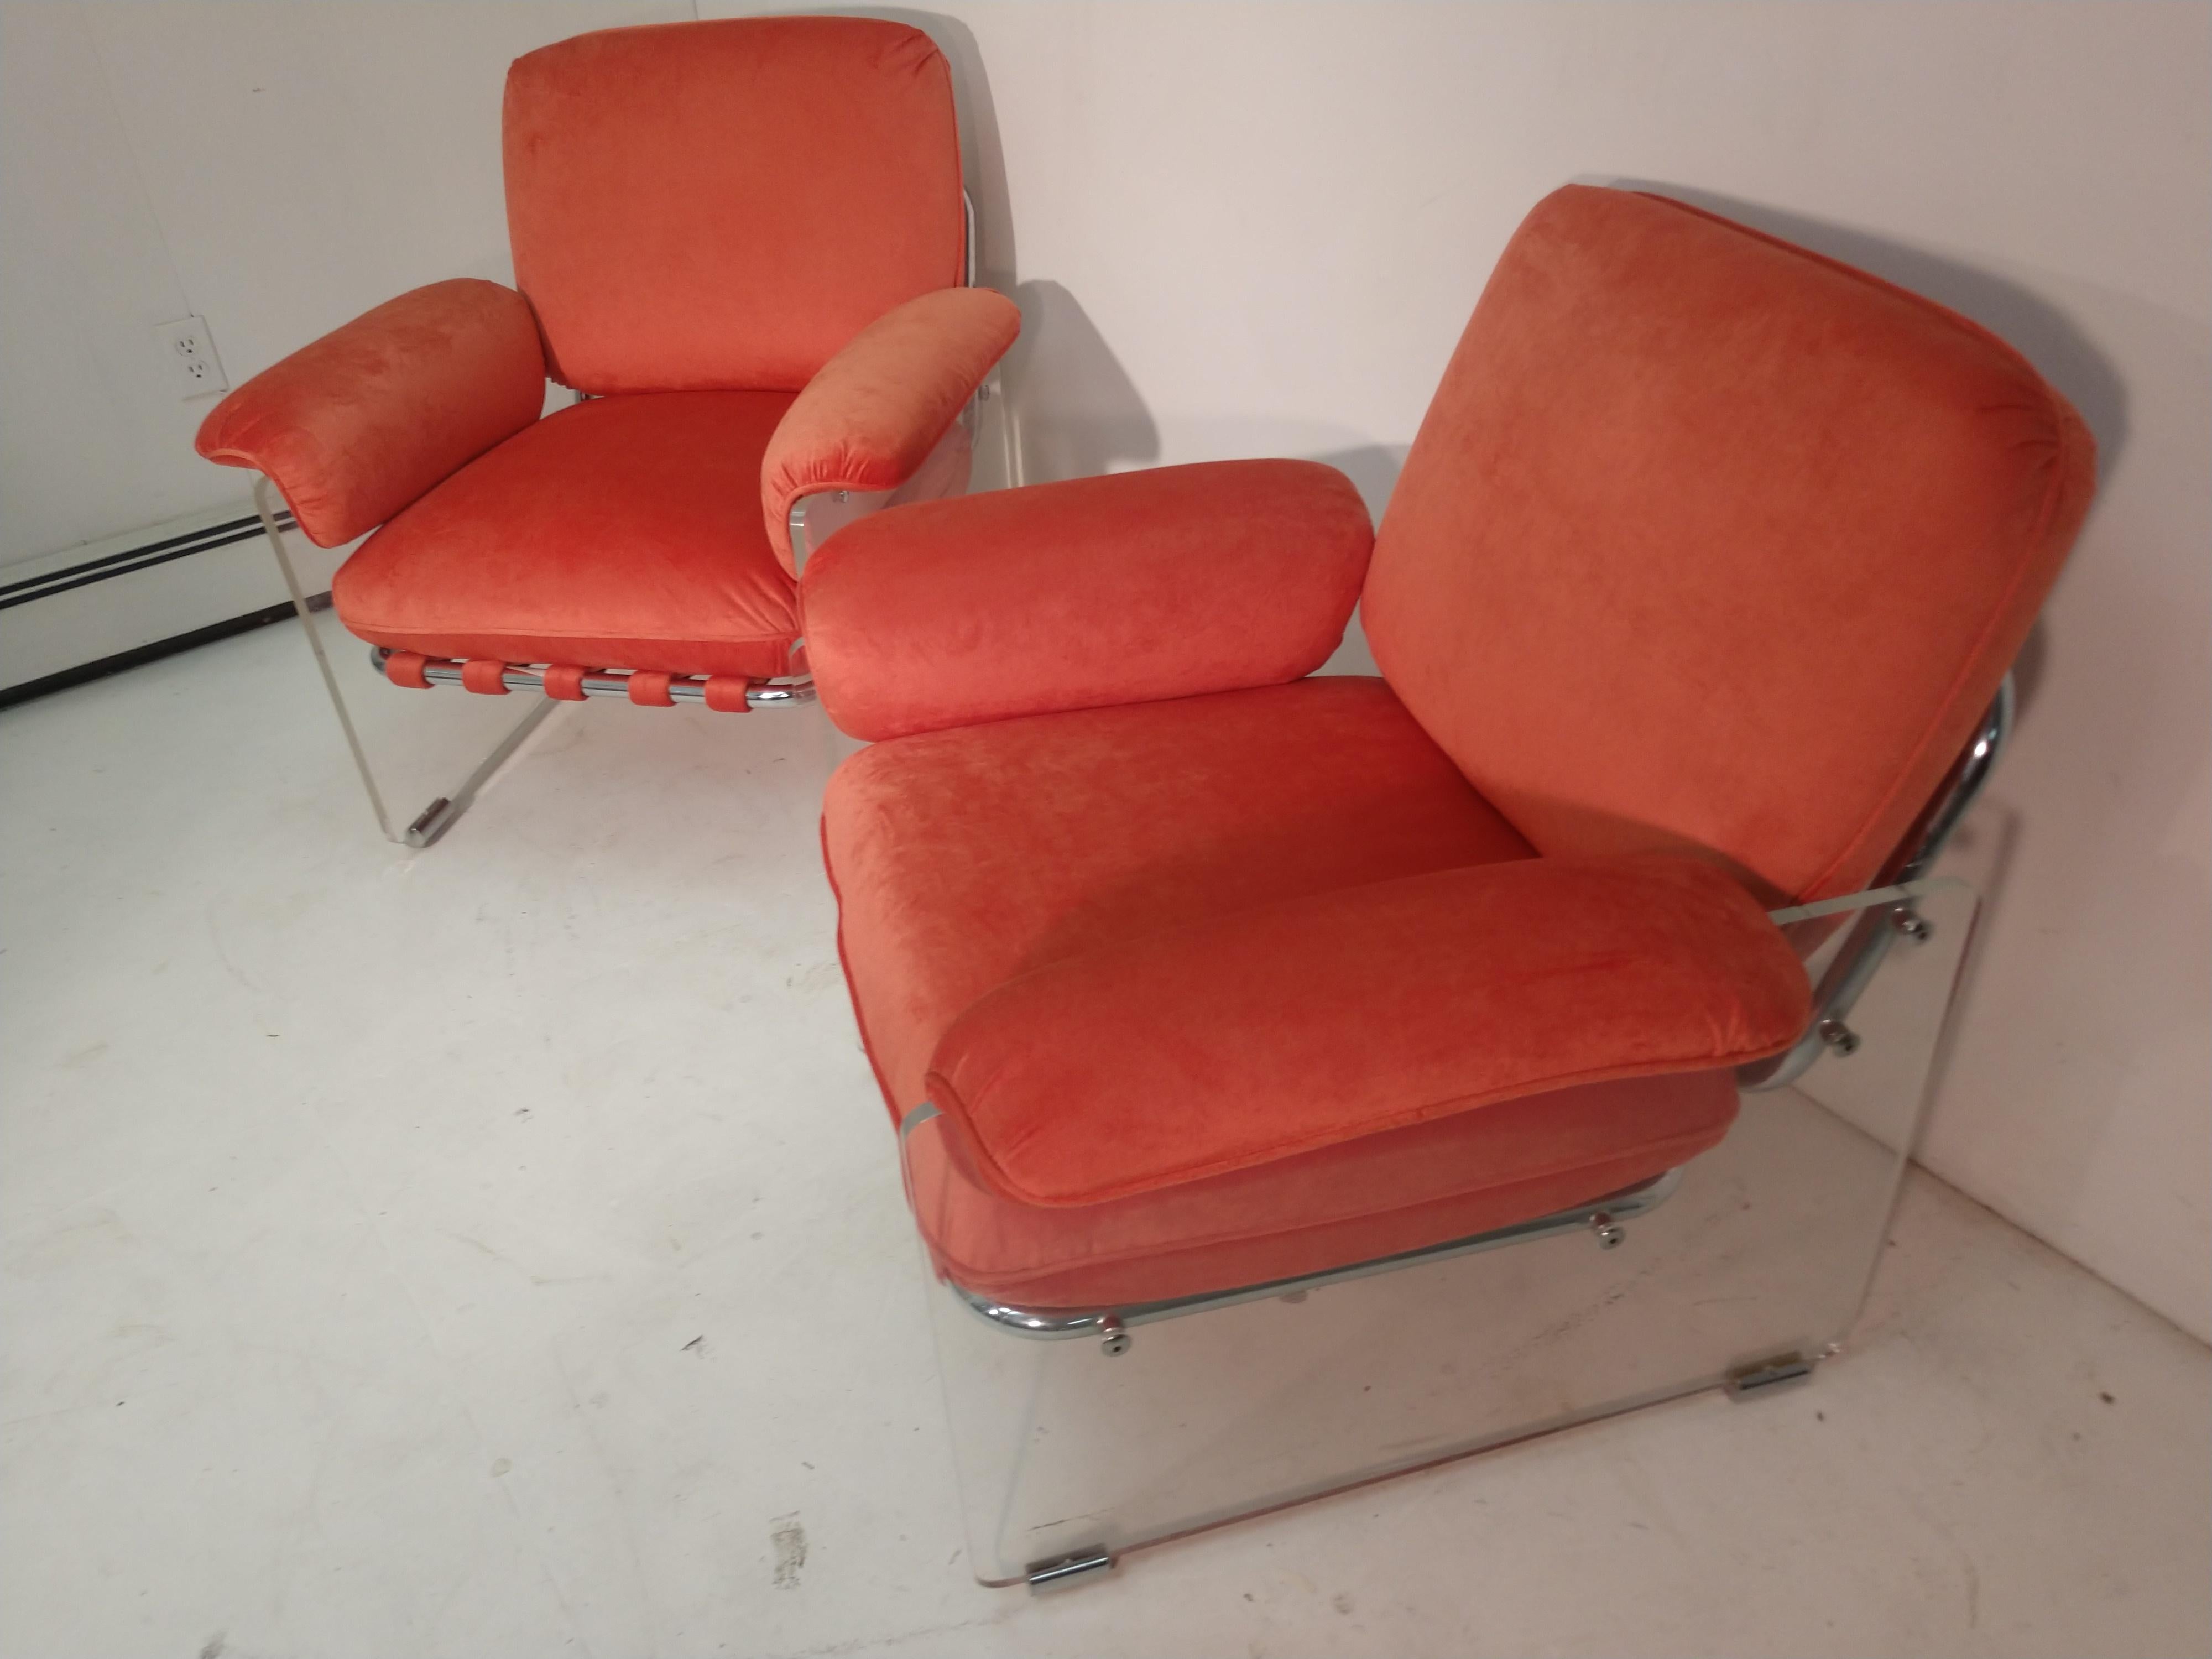 Fabulous pair of Mid-Century Modern Lucite and chrome lounge chairs by Pace. Totally restored in a orange ultra suede. All new foam, material and straps. Thick slabs of Lucite with chrome feet and hardware. The Lucite and chrome in excellent vintage